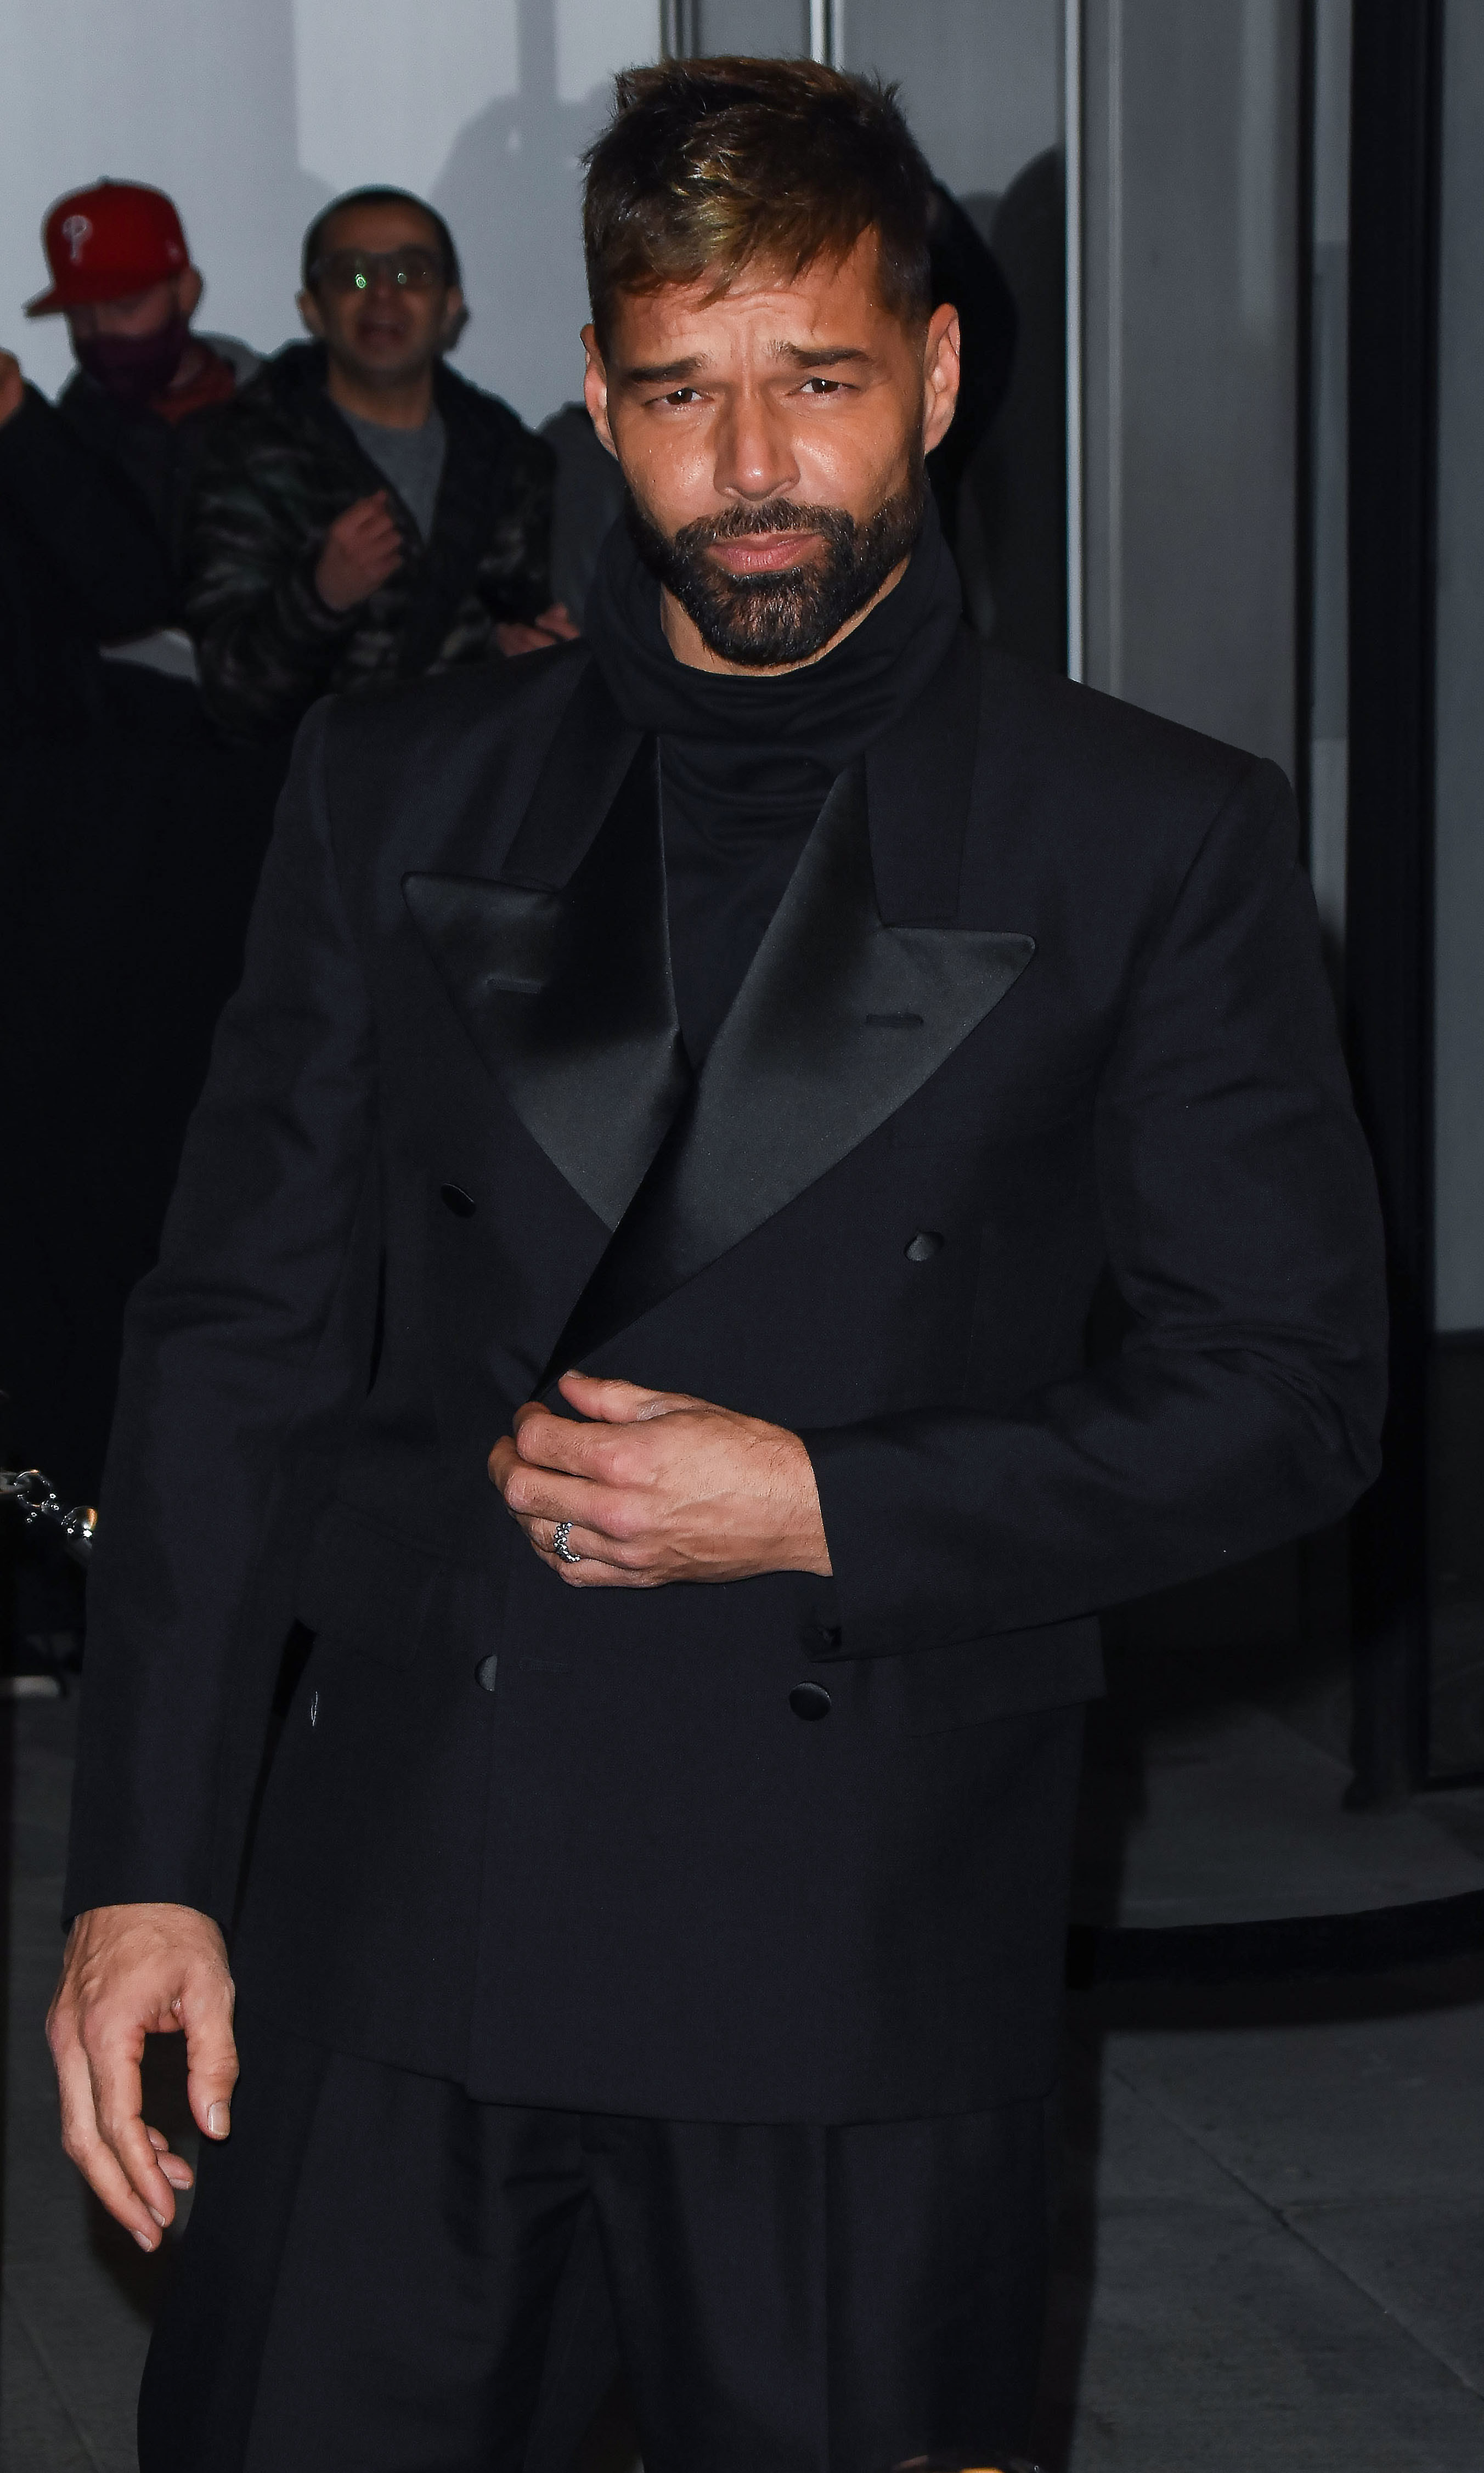 Eicky is seen in NYC in a suit and rocking a beard